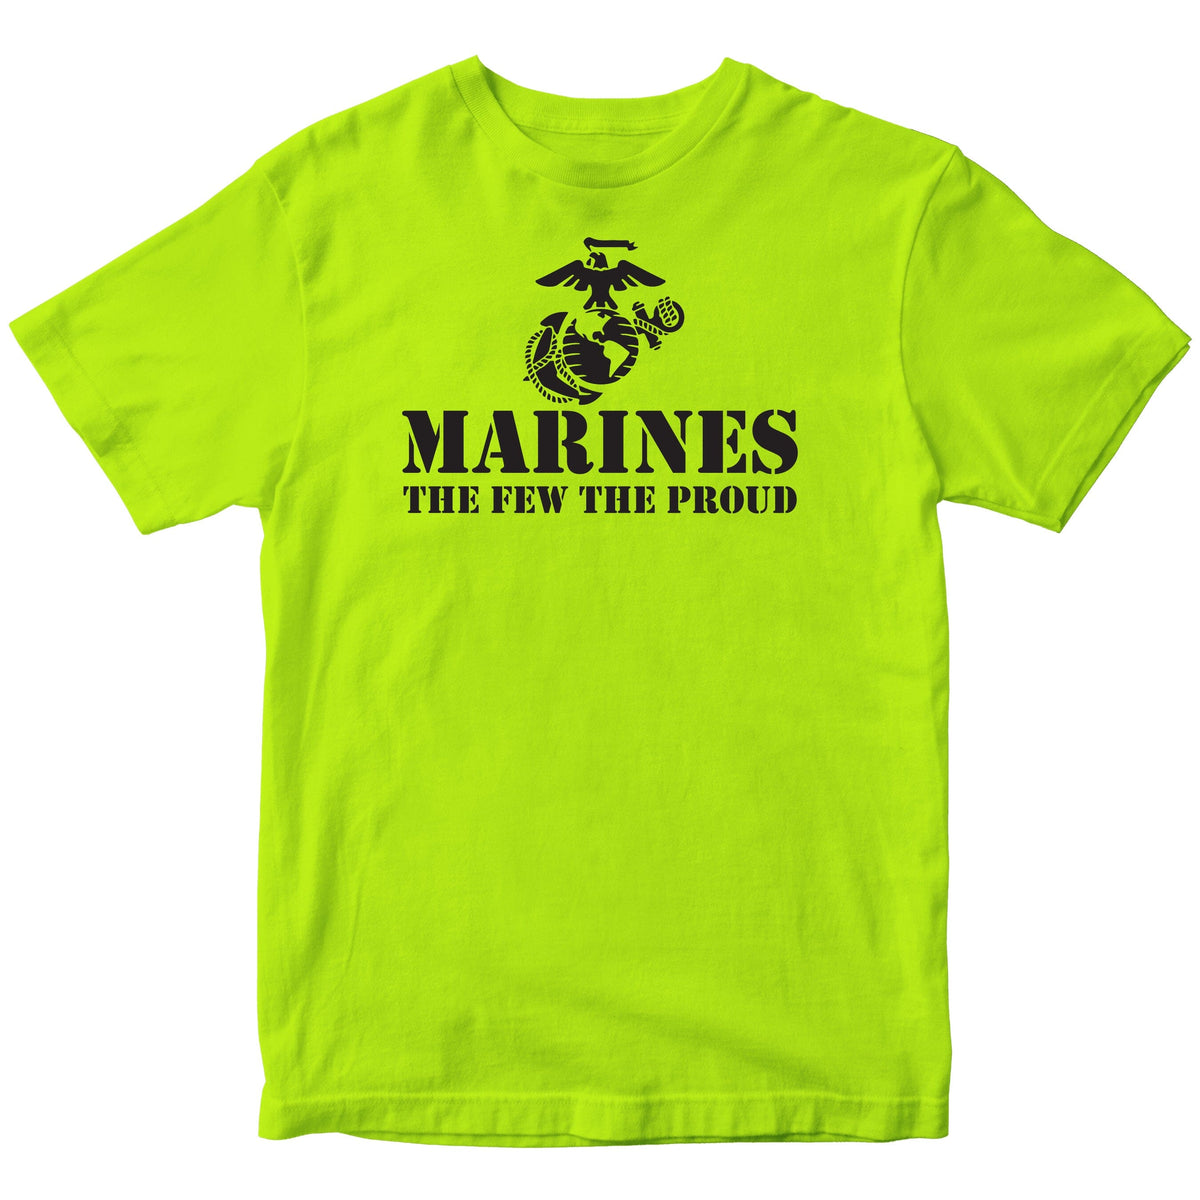 Closeout Safety Green Few The Proud Tee Medium ONLY ($7.95)